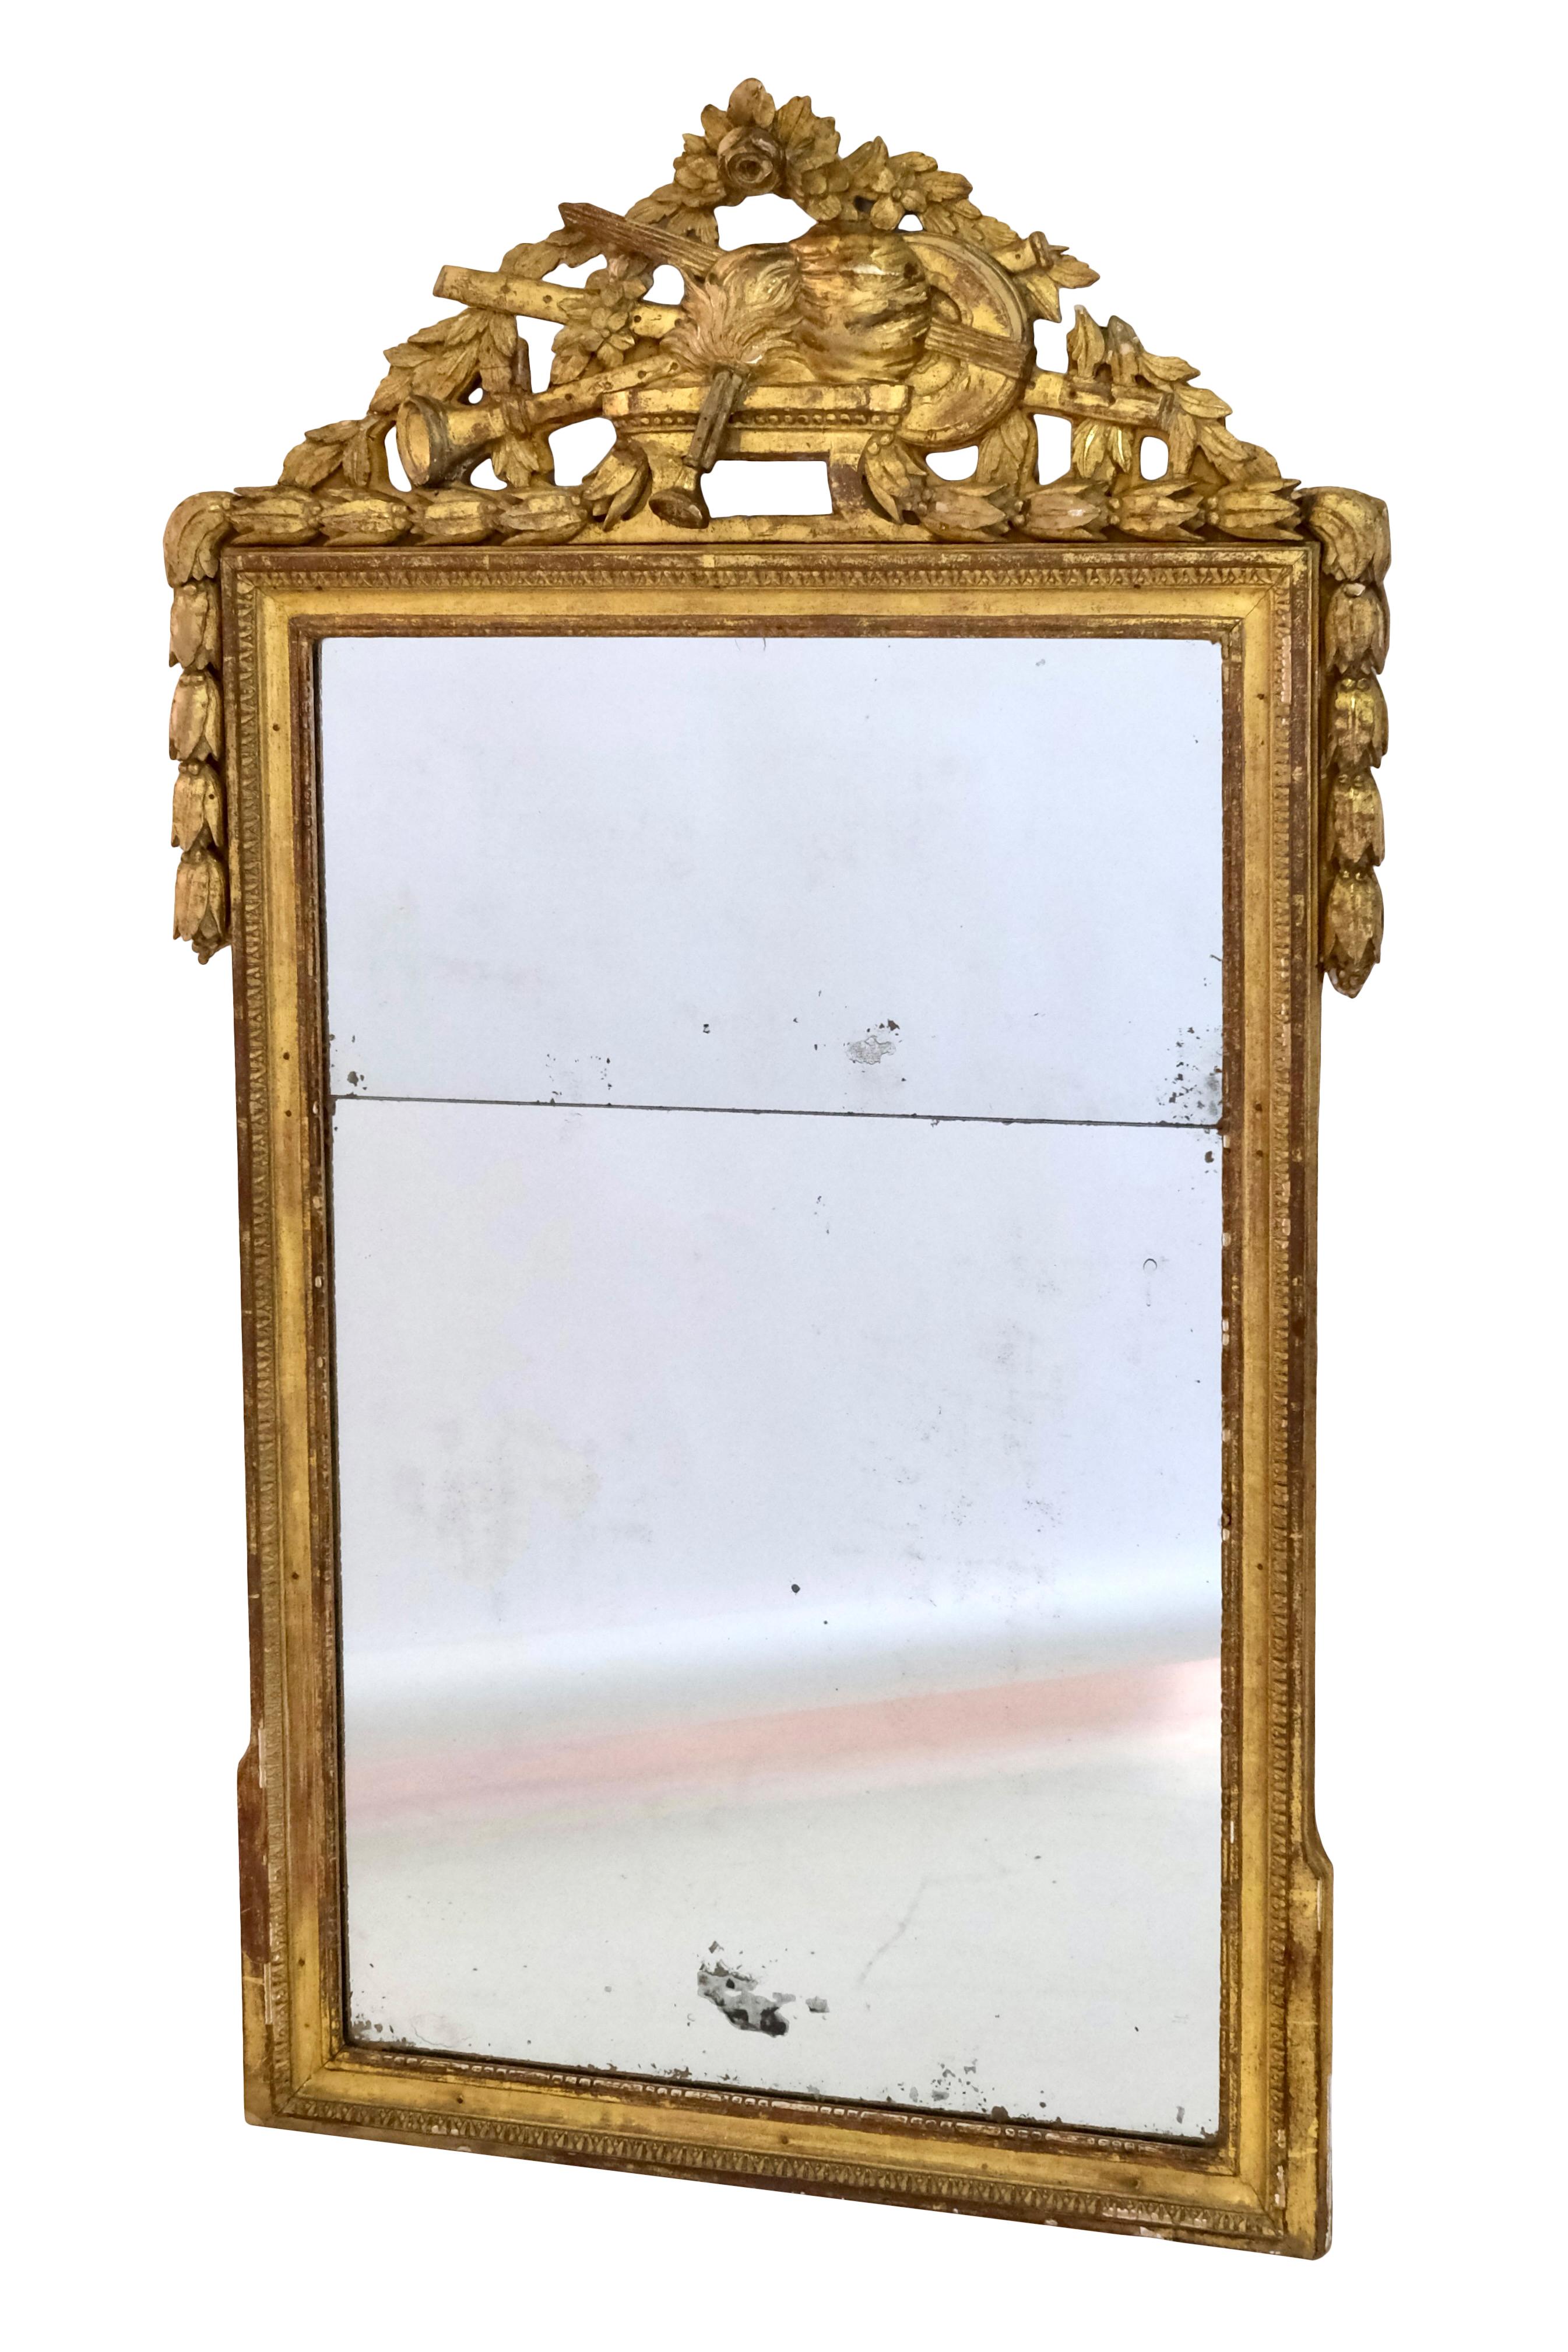 1750s Louis Seize XVI Golden Console Table with Marble and original Mirror  For Sale 6